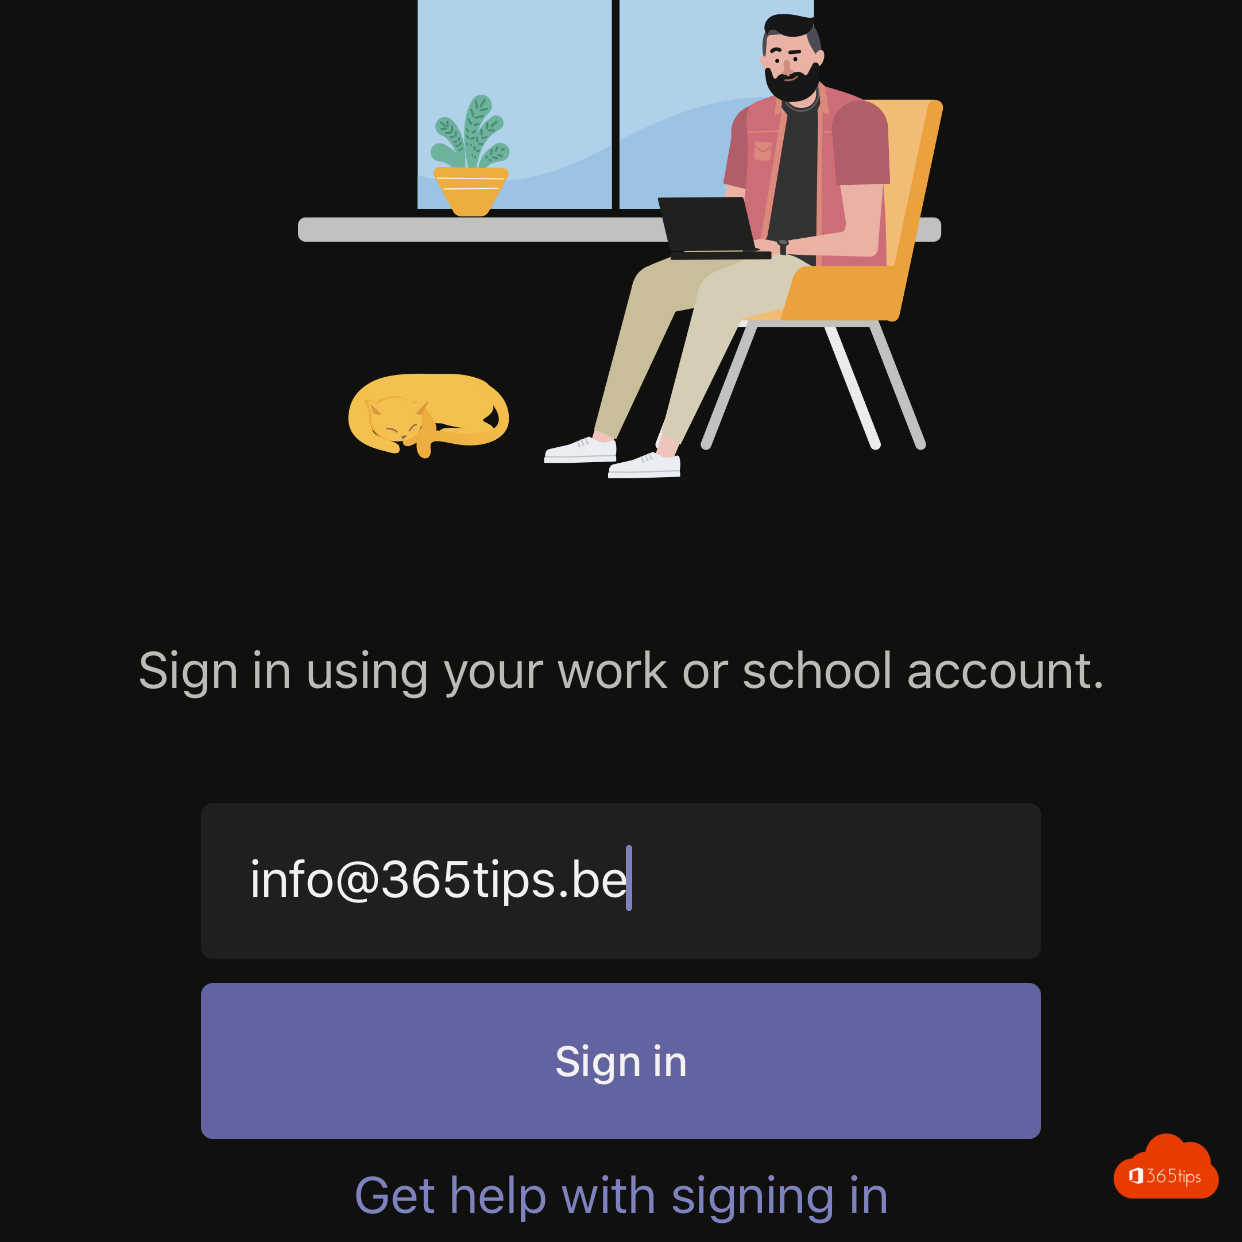 Microsoft Teams Login - Basic Guide to Getting Started Quickly